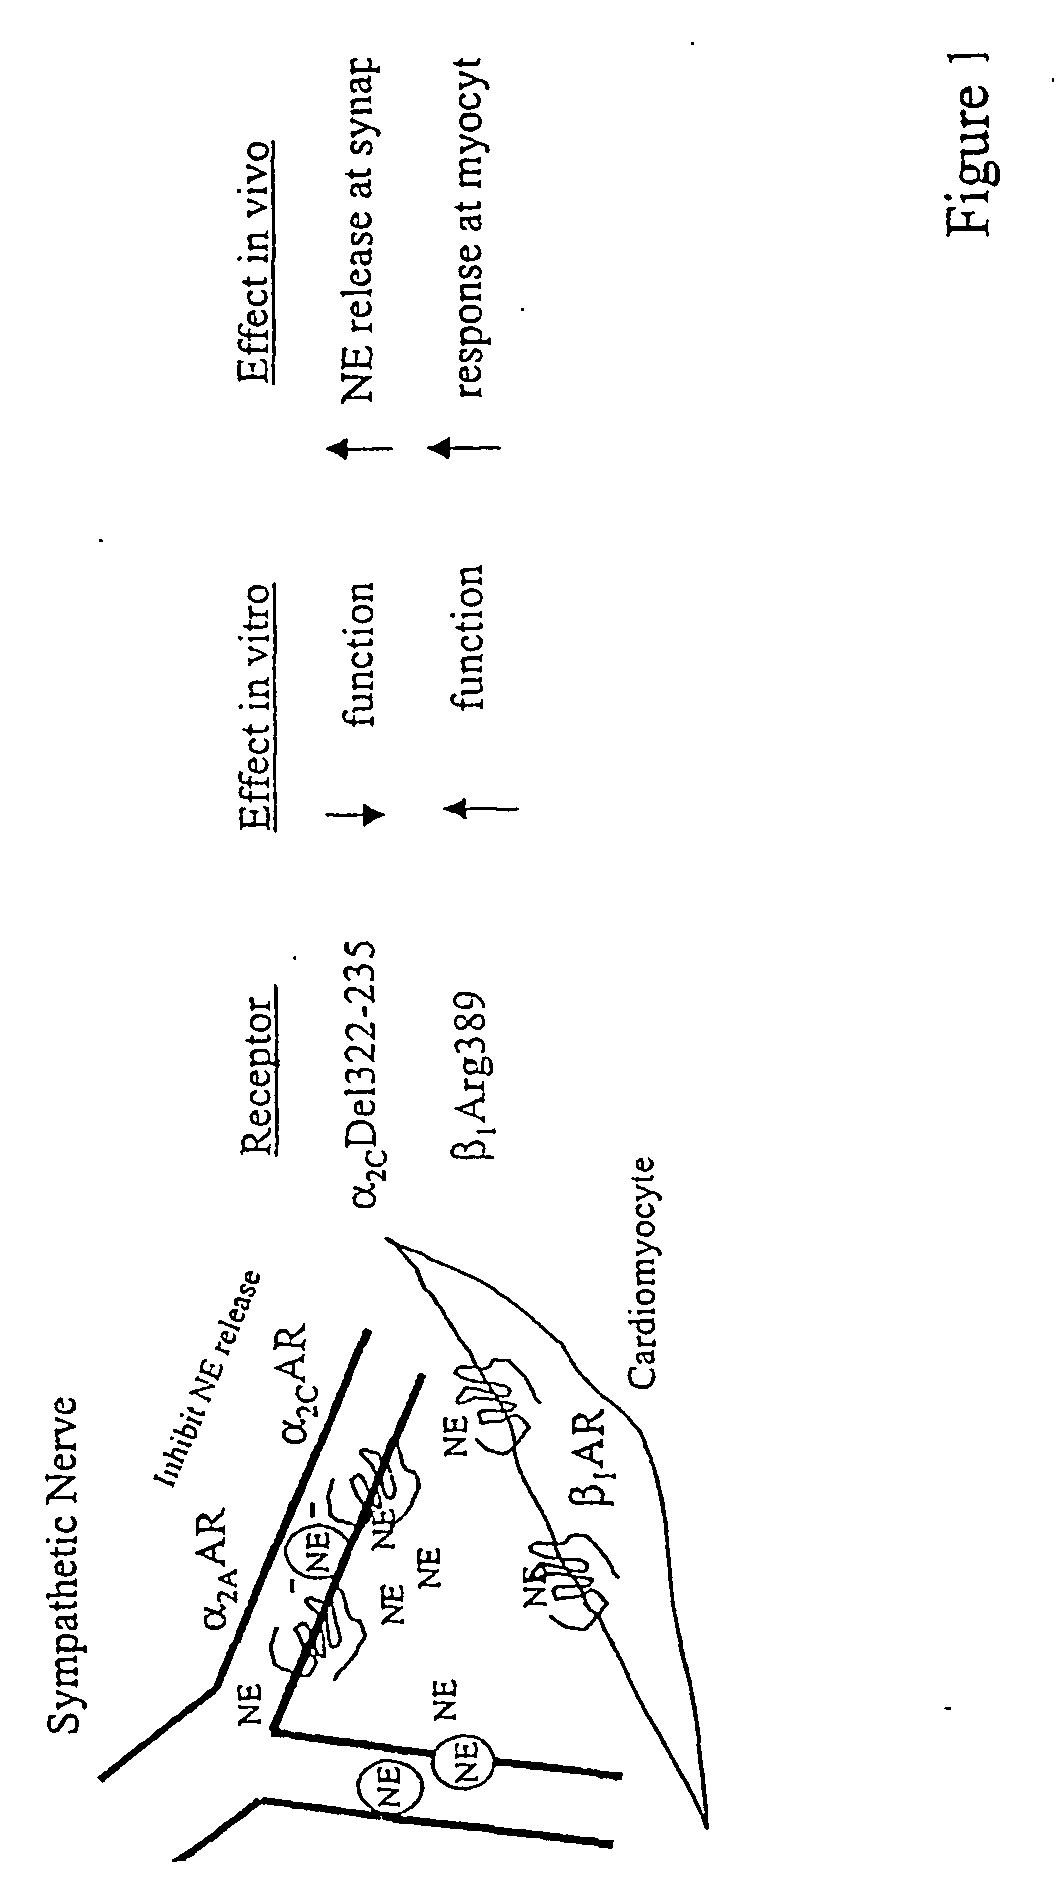 Methods of cardiovascular disease assessment in an individual